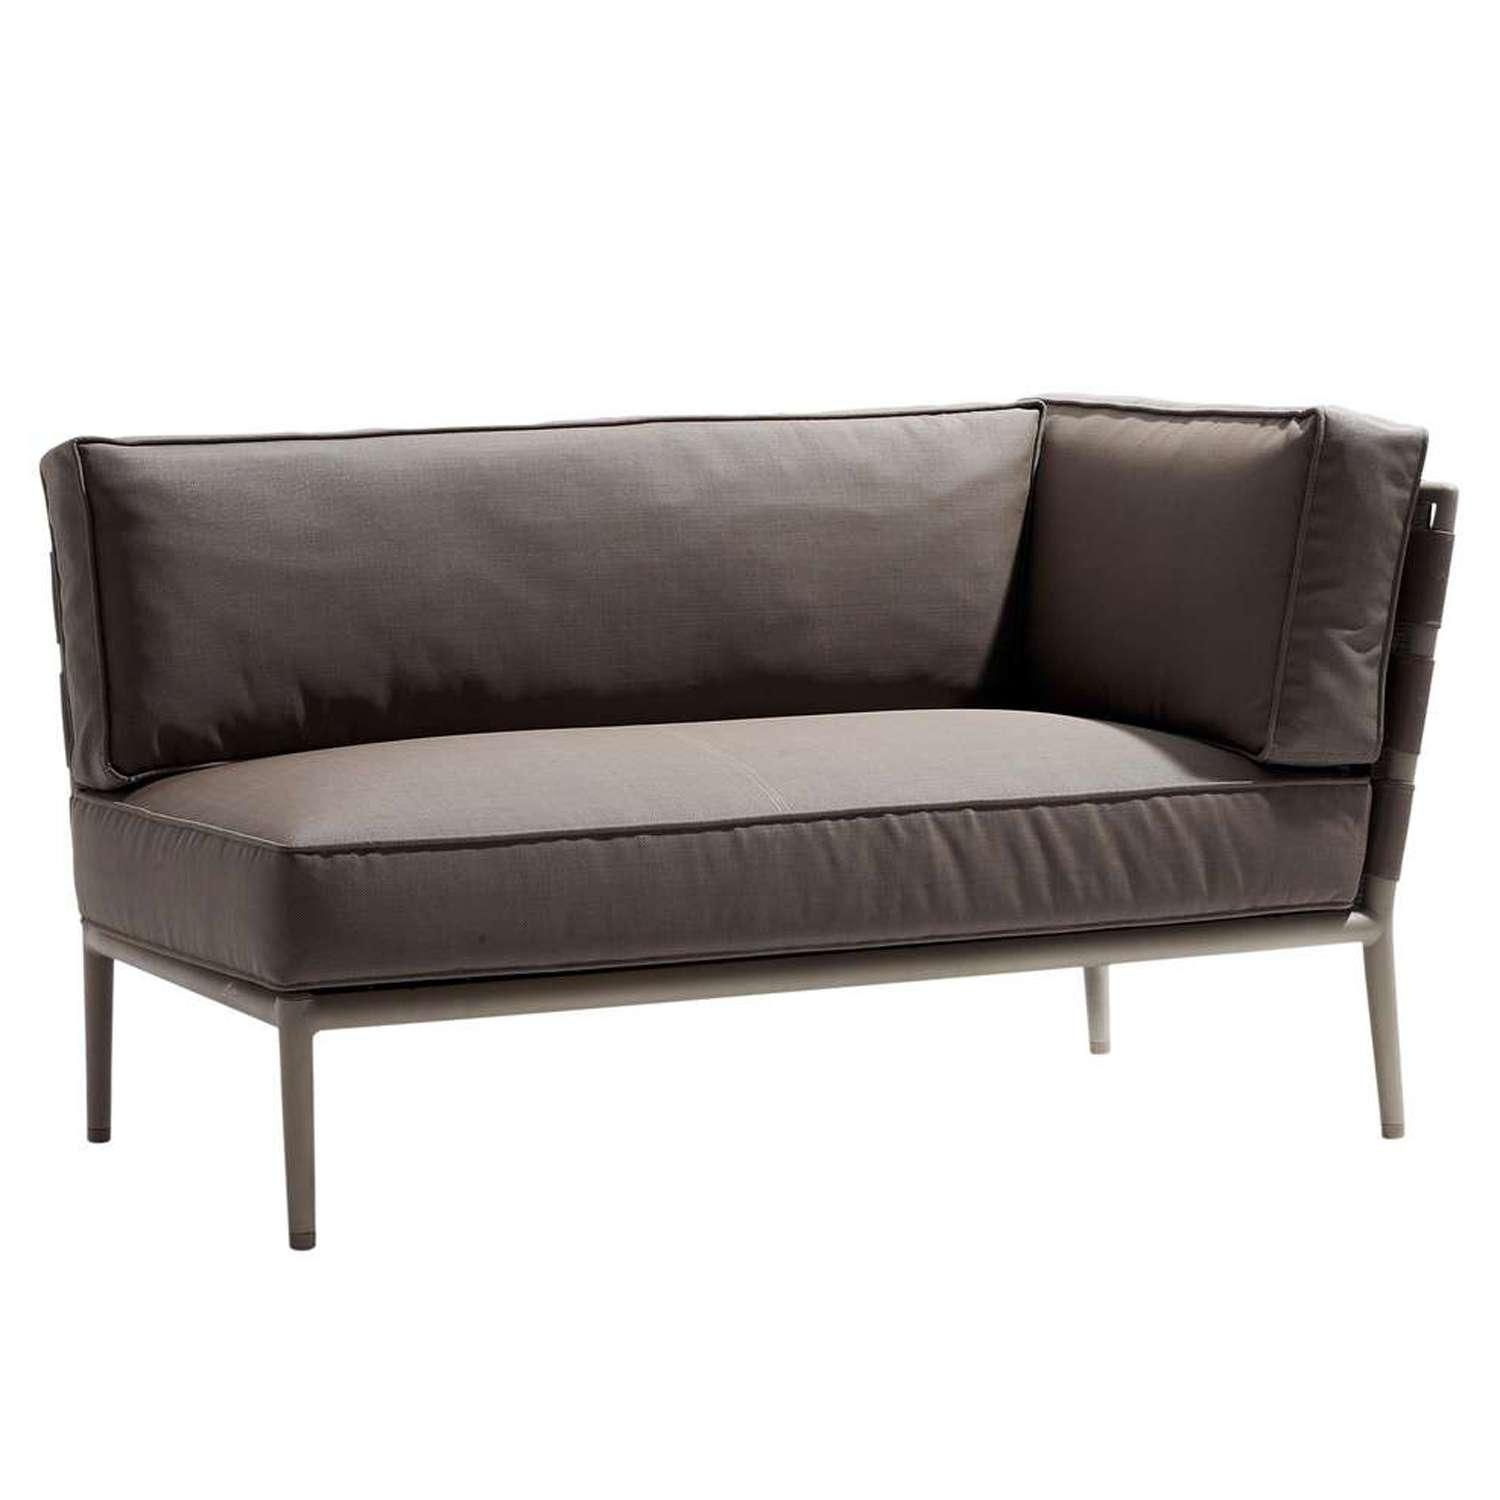 Sofas : Fabulous Single Seater Sofa Designs Single Chair Bed One Pertaining To Cushion Sofa Beds (Photo 15 of 23)